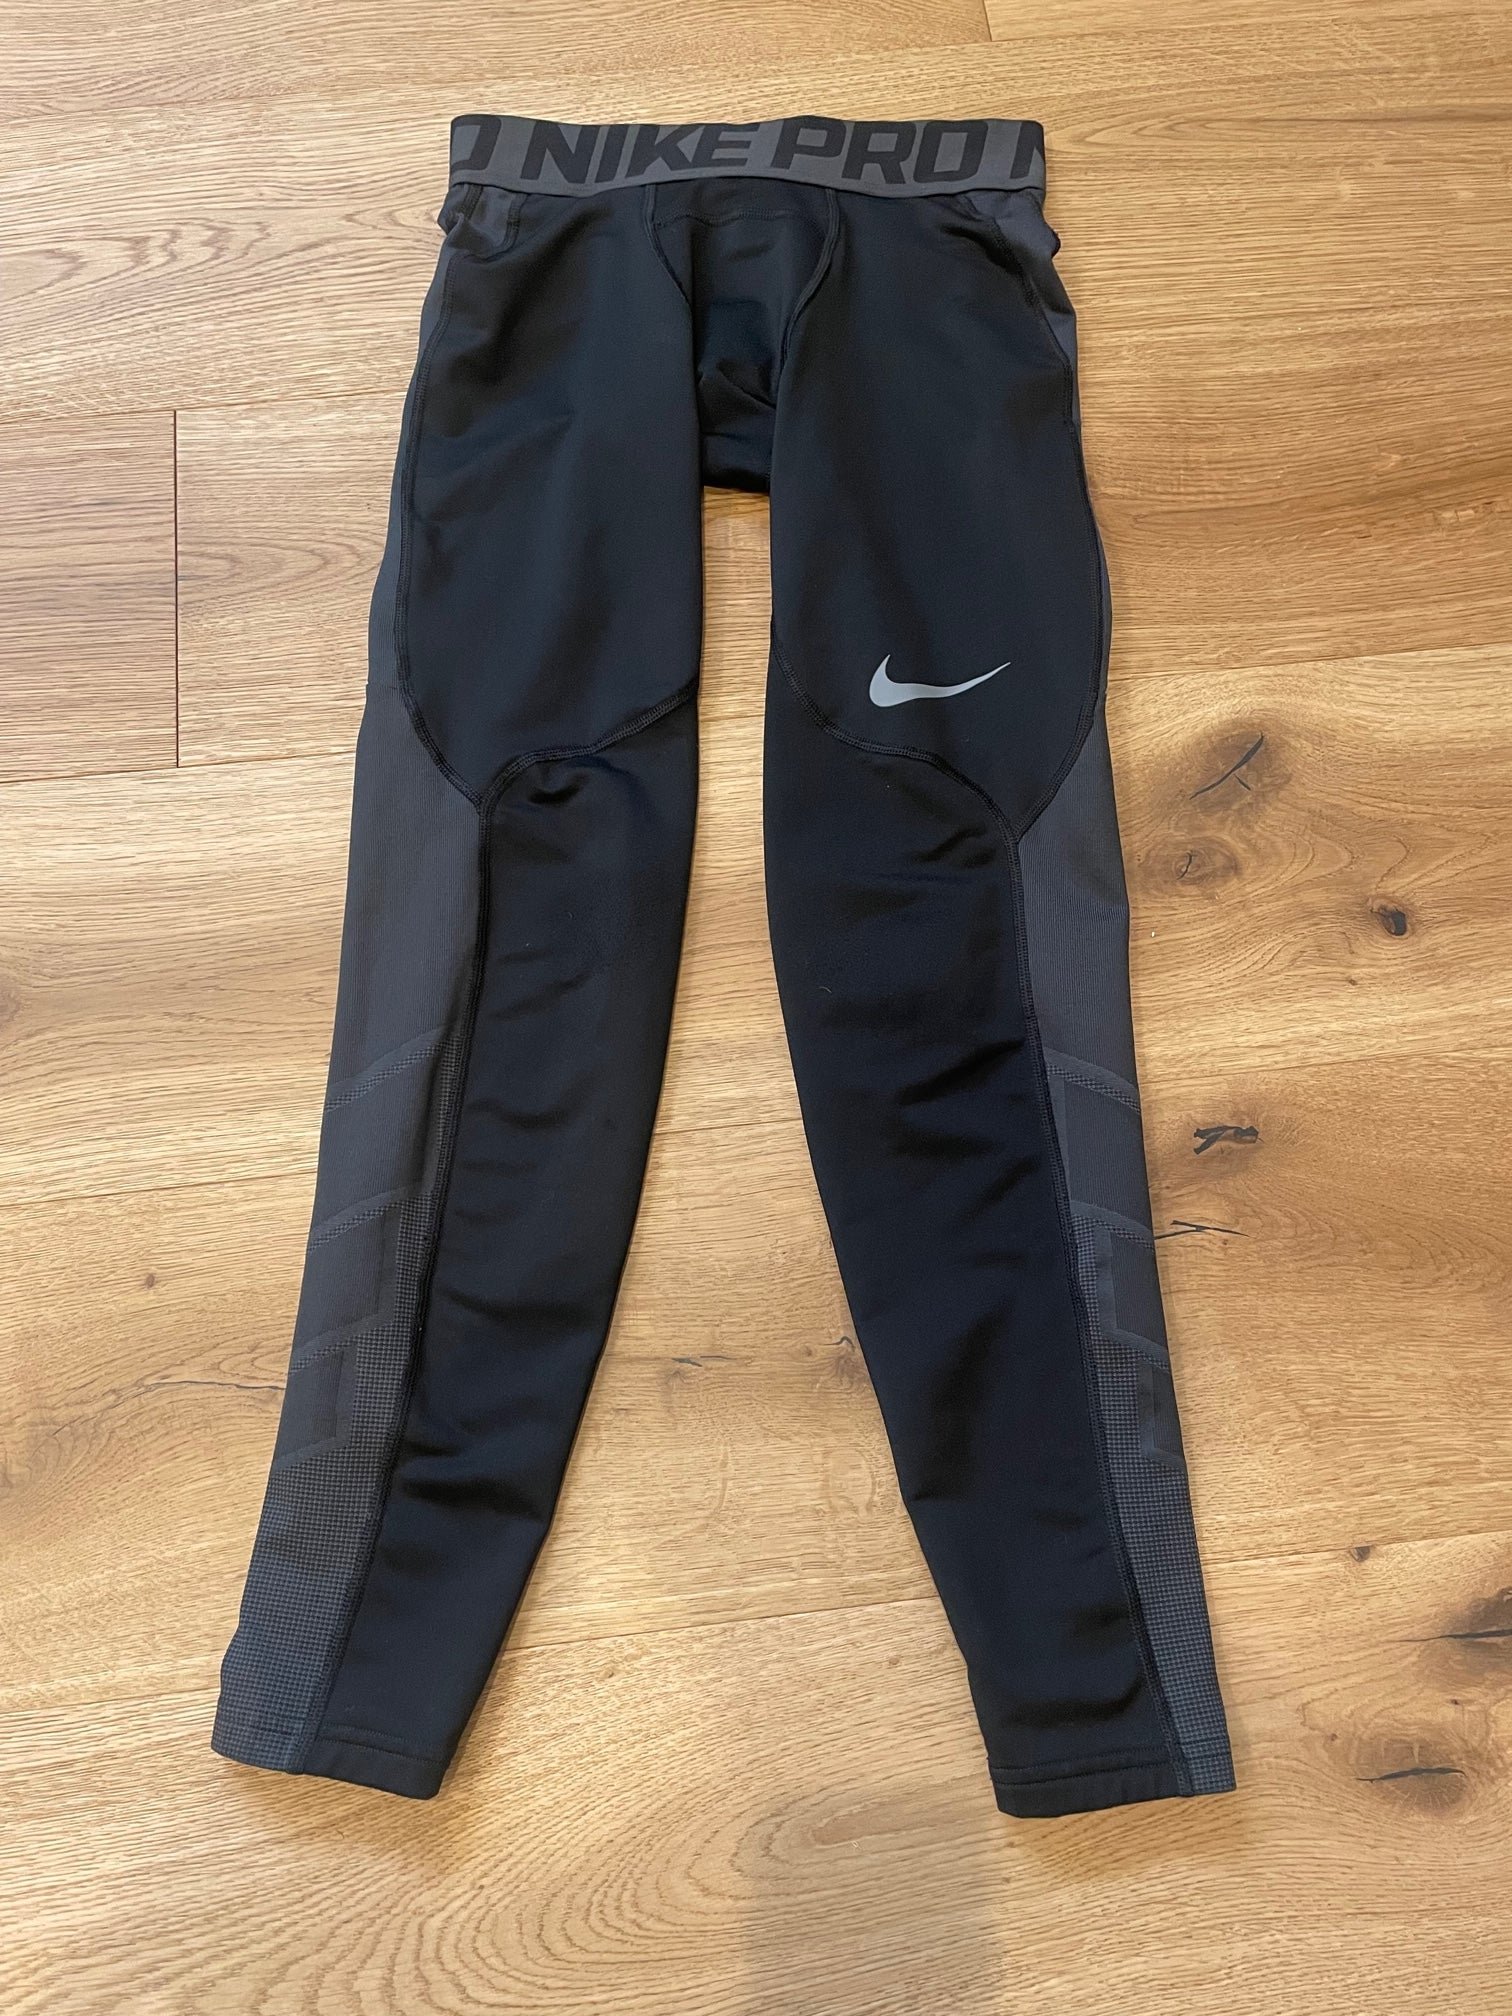 Nike Pro HyperWarm Compression - Tights Leggings Pants - Youth